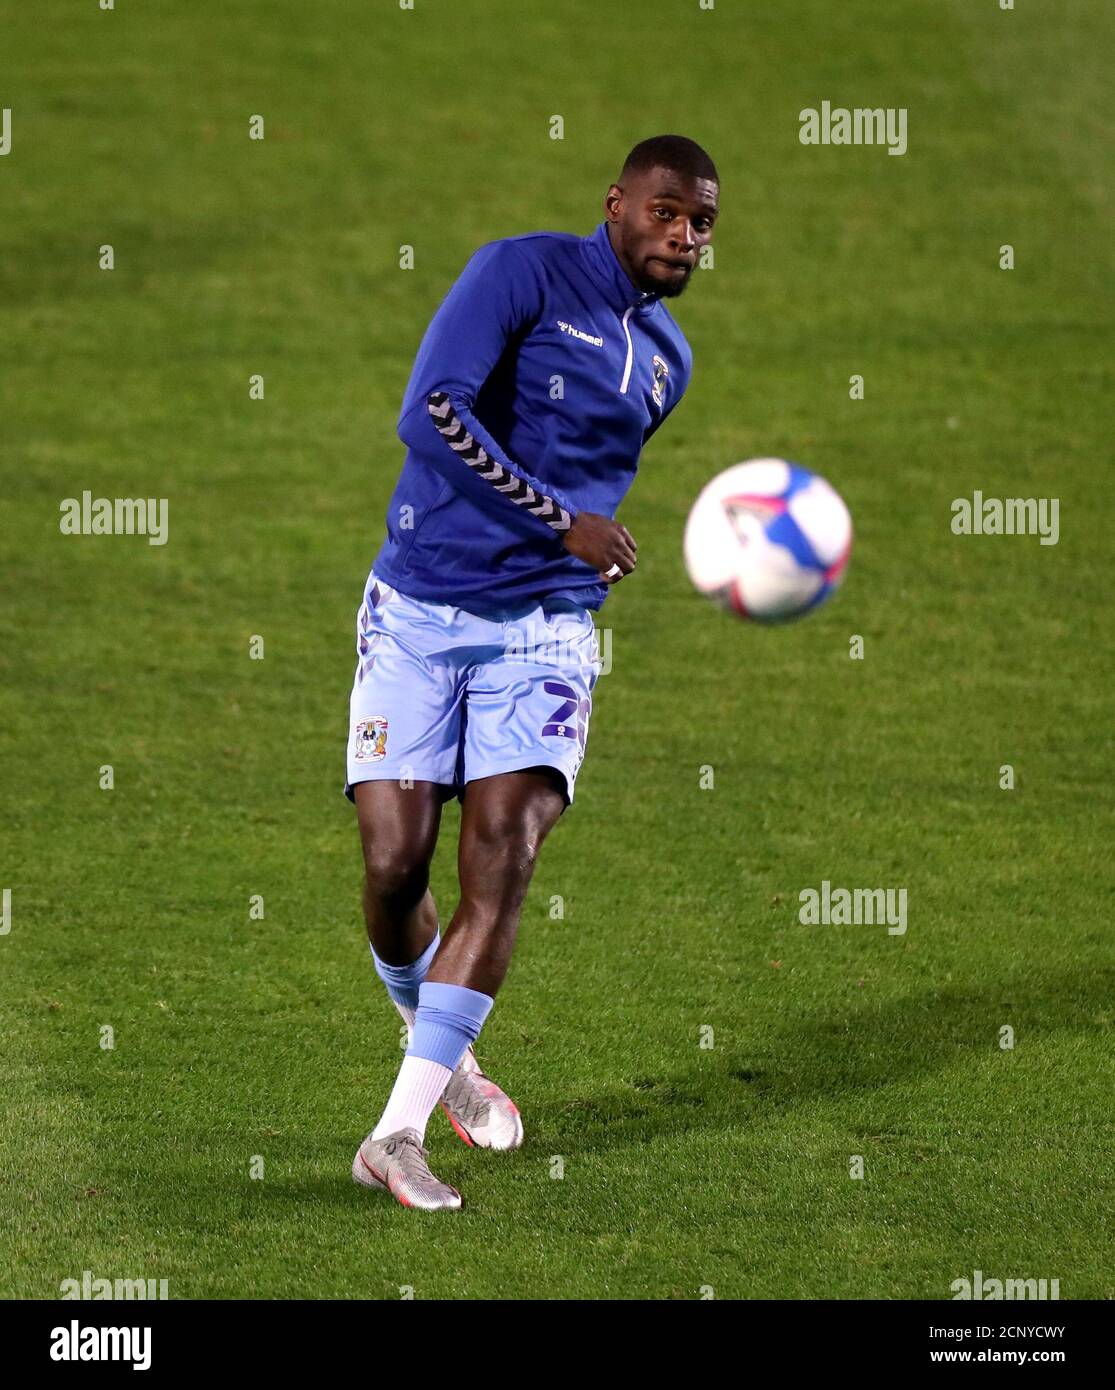 Coventry City's Amadou Bakayoko warms up before the Sky Bet Championship match at St Andrew's Trillion Trophy Stadium, Birmingham. Stock Photo